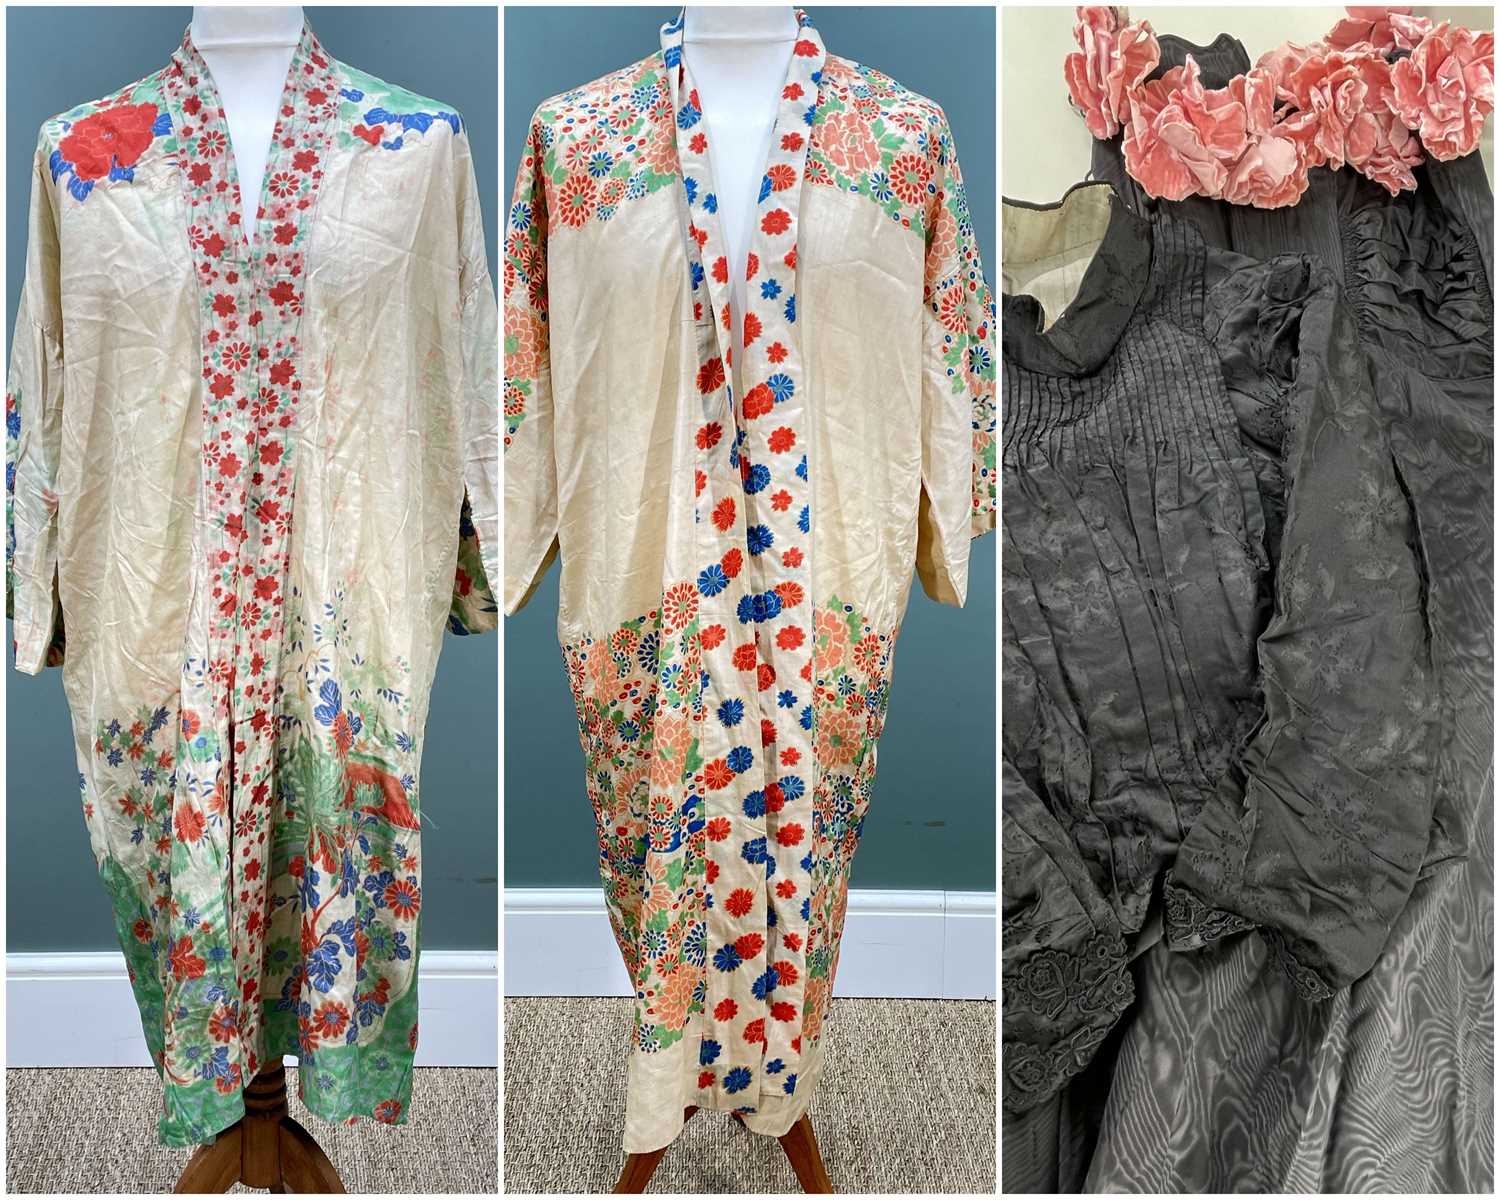 VICTORIAN BLACK BODICE, SATIN DRESS, & JAPANESE-STYLE CREPE 'KIMONO' GOWNS, the dress with watersilk